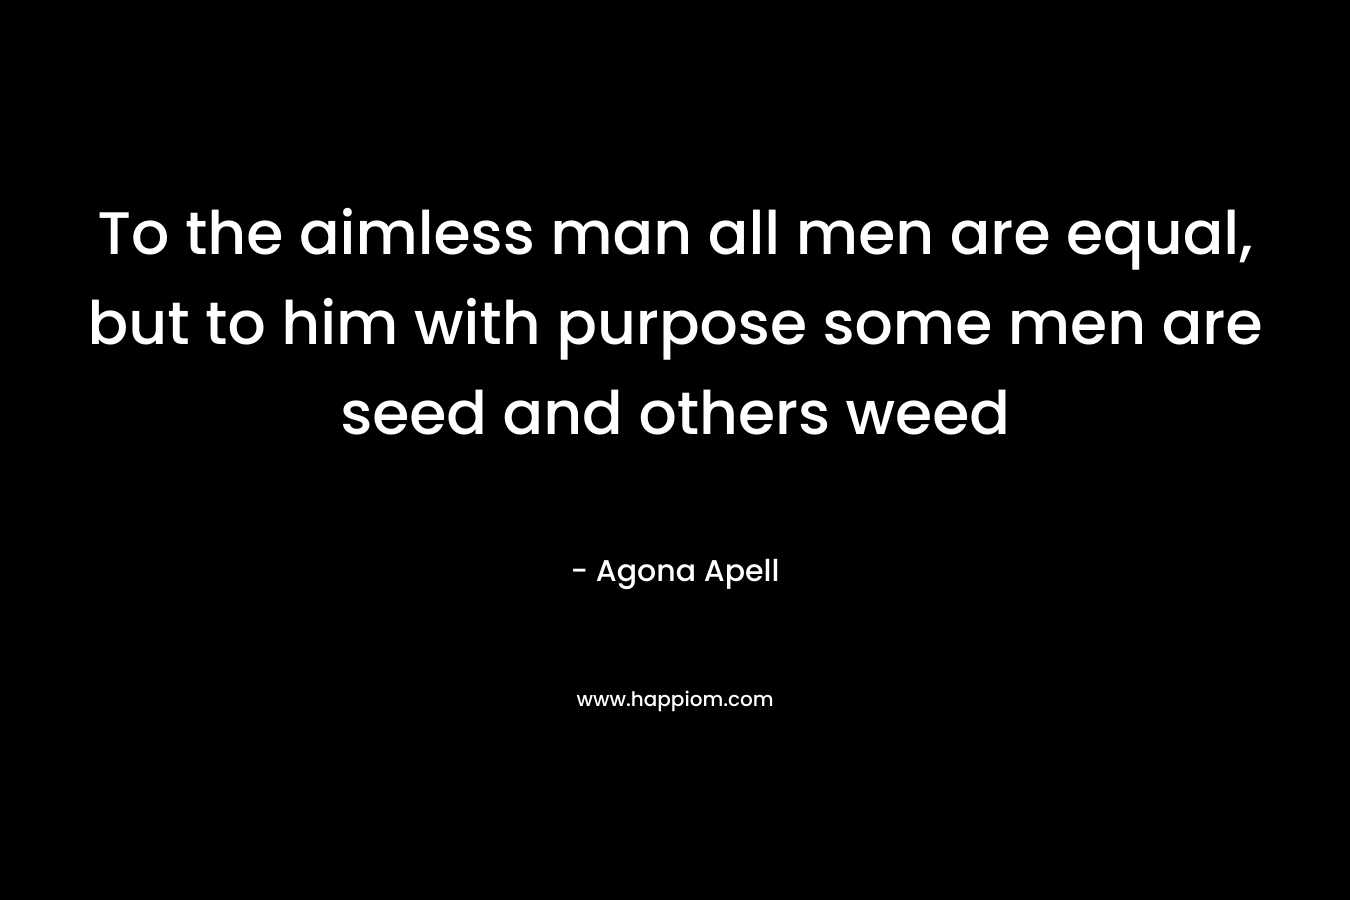 To the aimless man all men are equal, but to him with purpose some men are seed and others weed